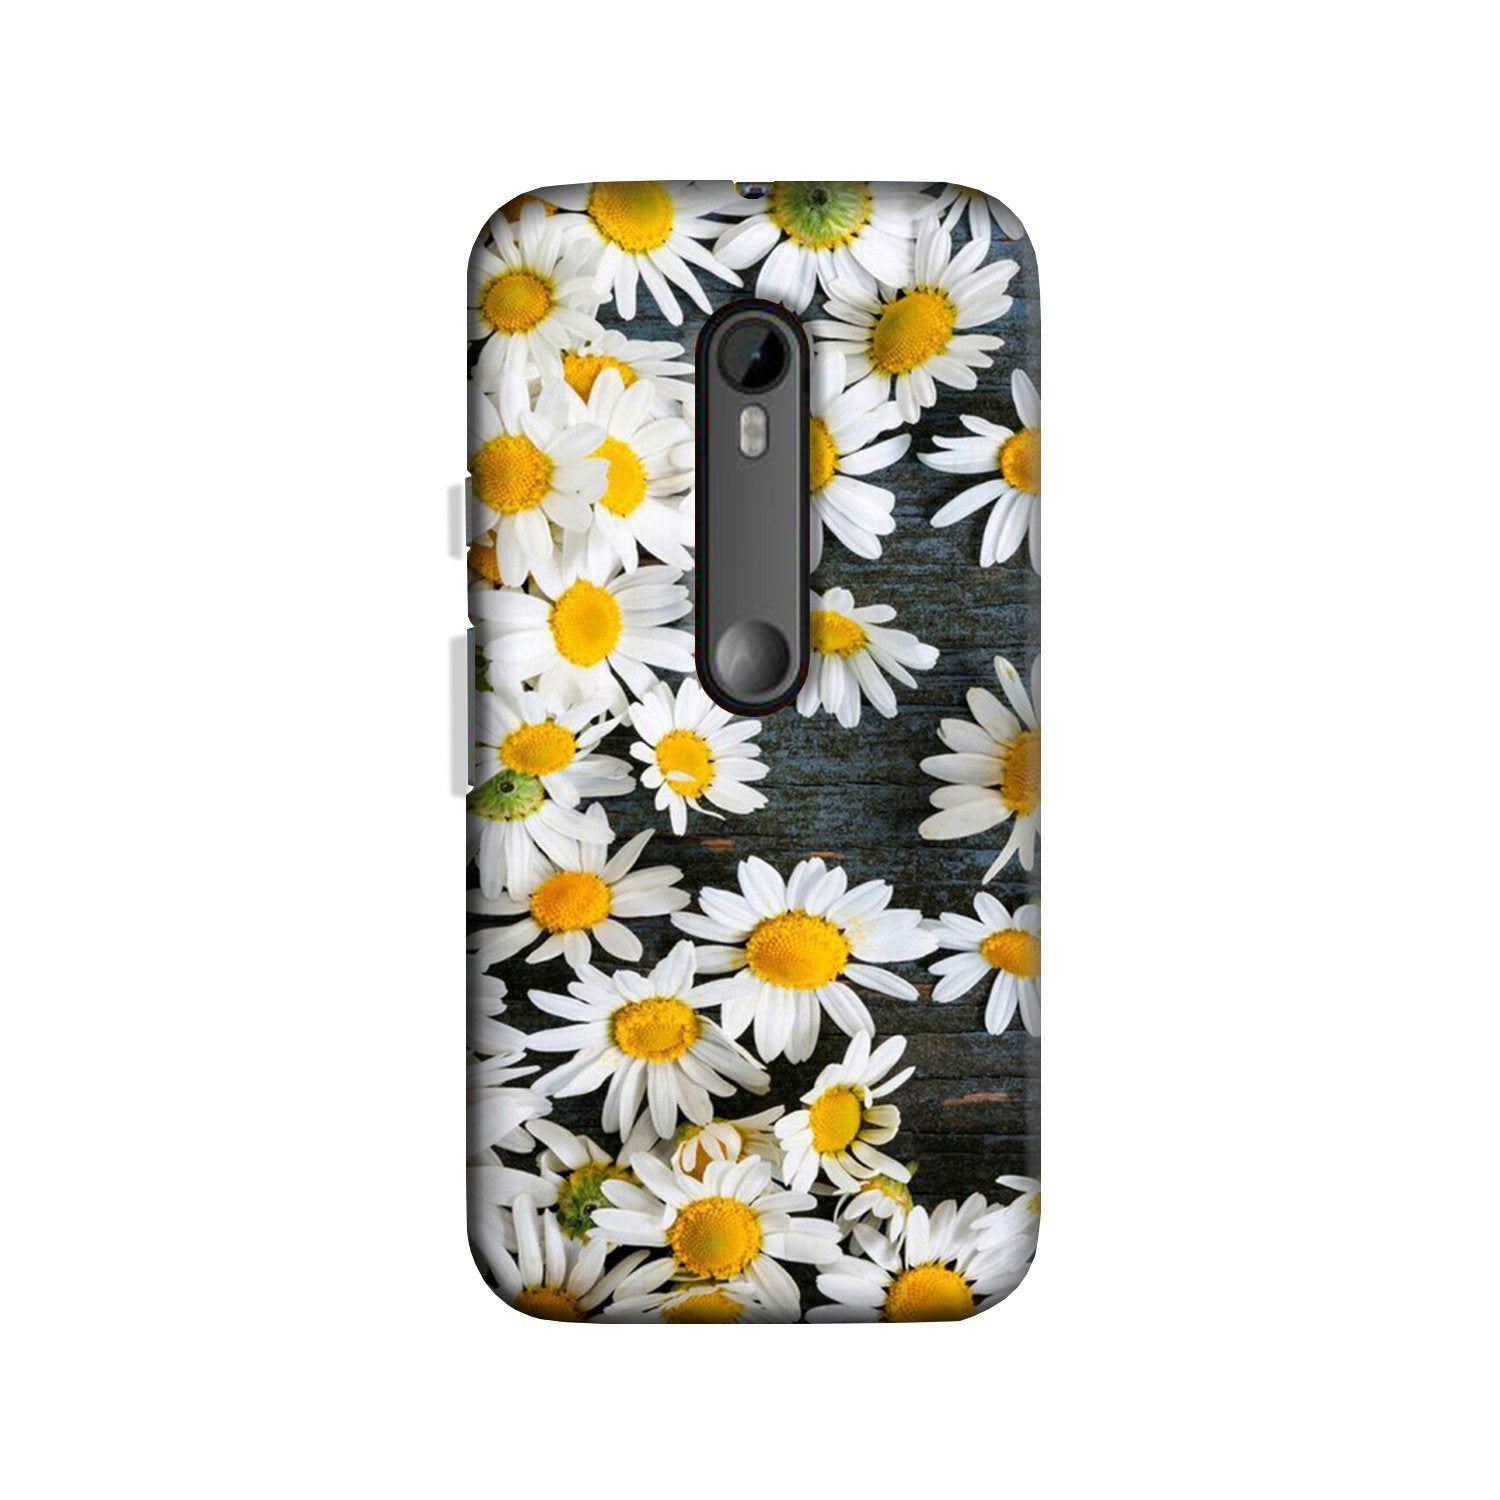 White flowers2 Case for Moto X Style